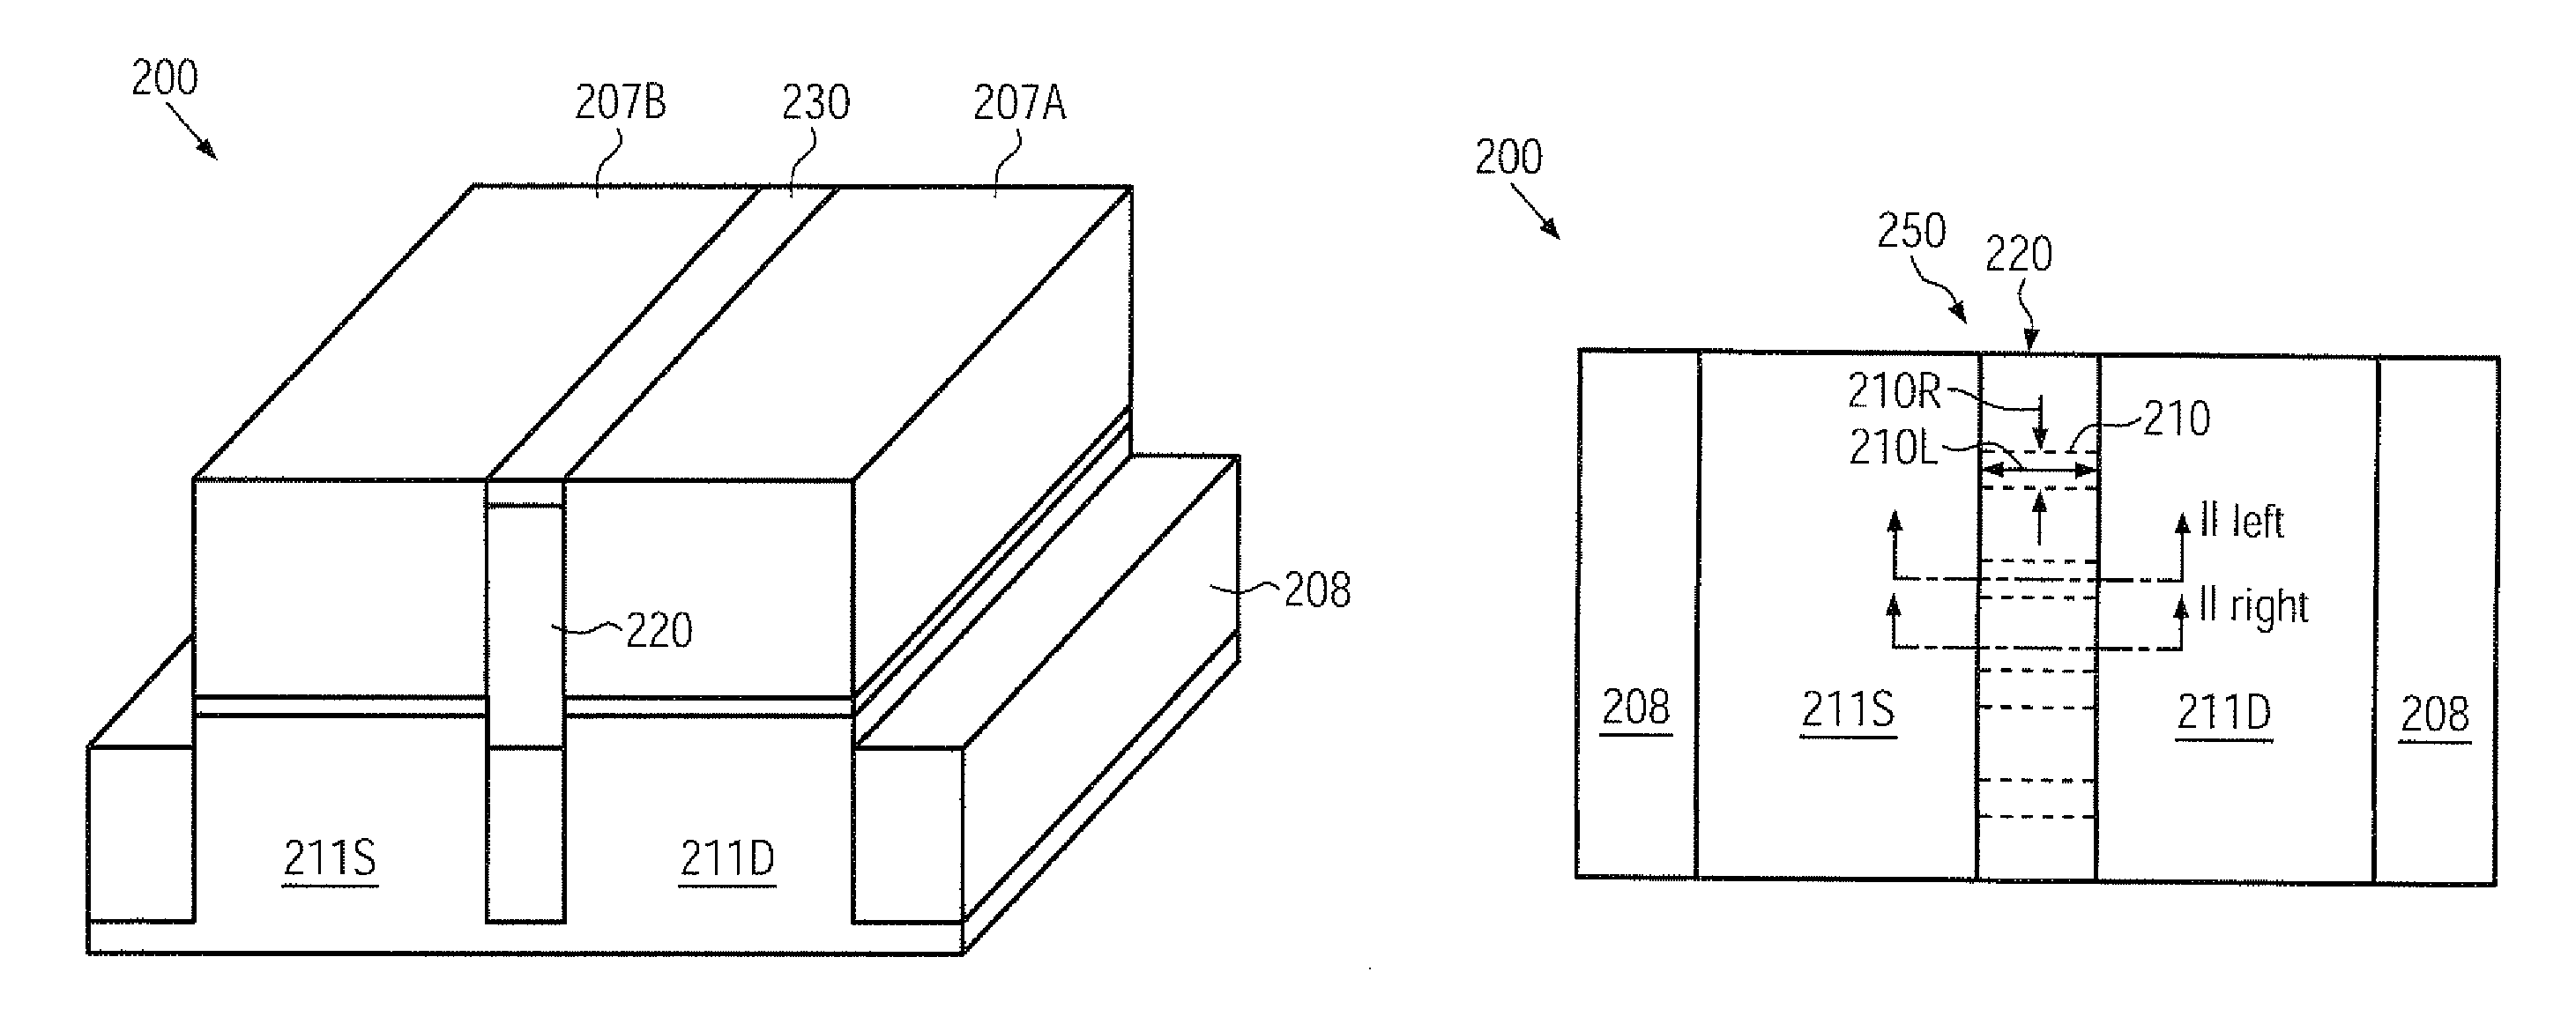 Method for forming double gate and tri-gate transistors on a bulk substrate